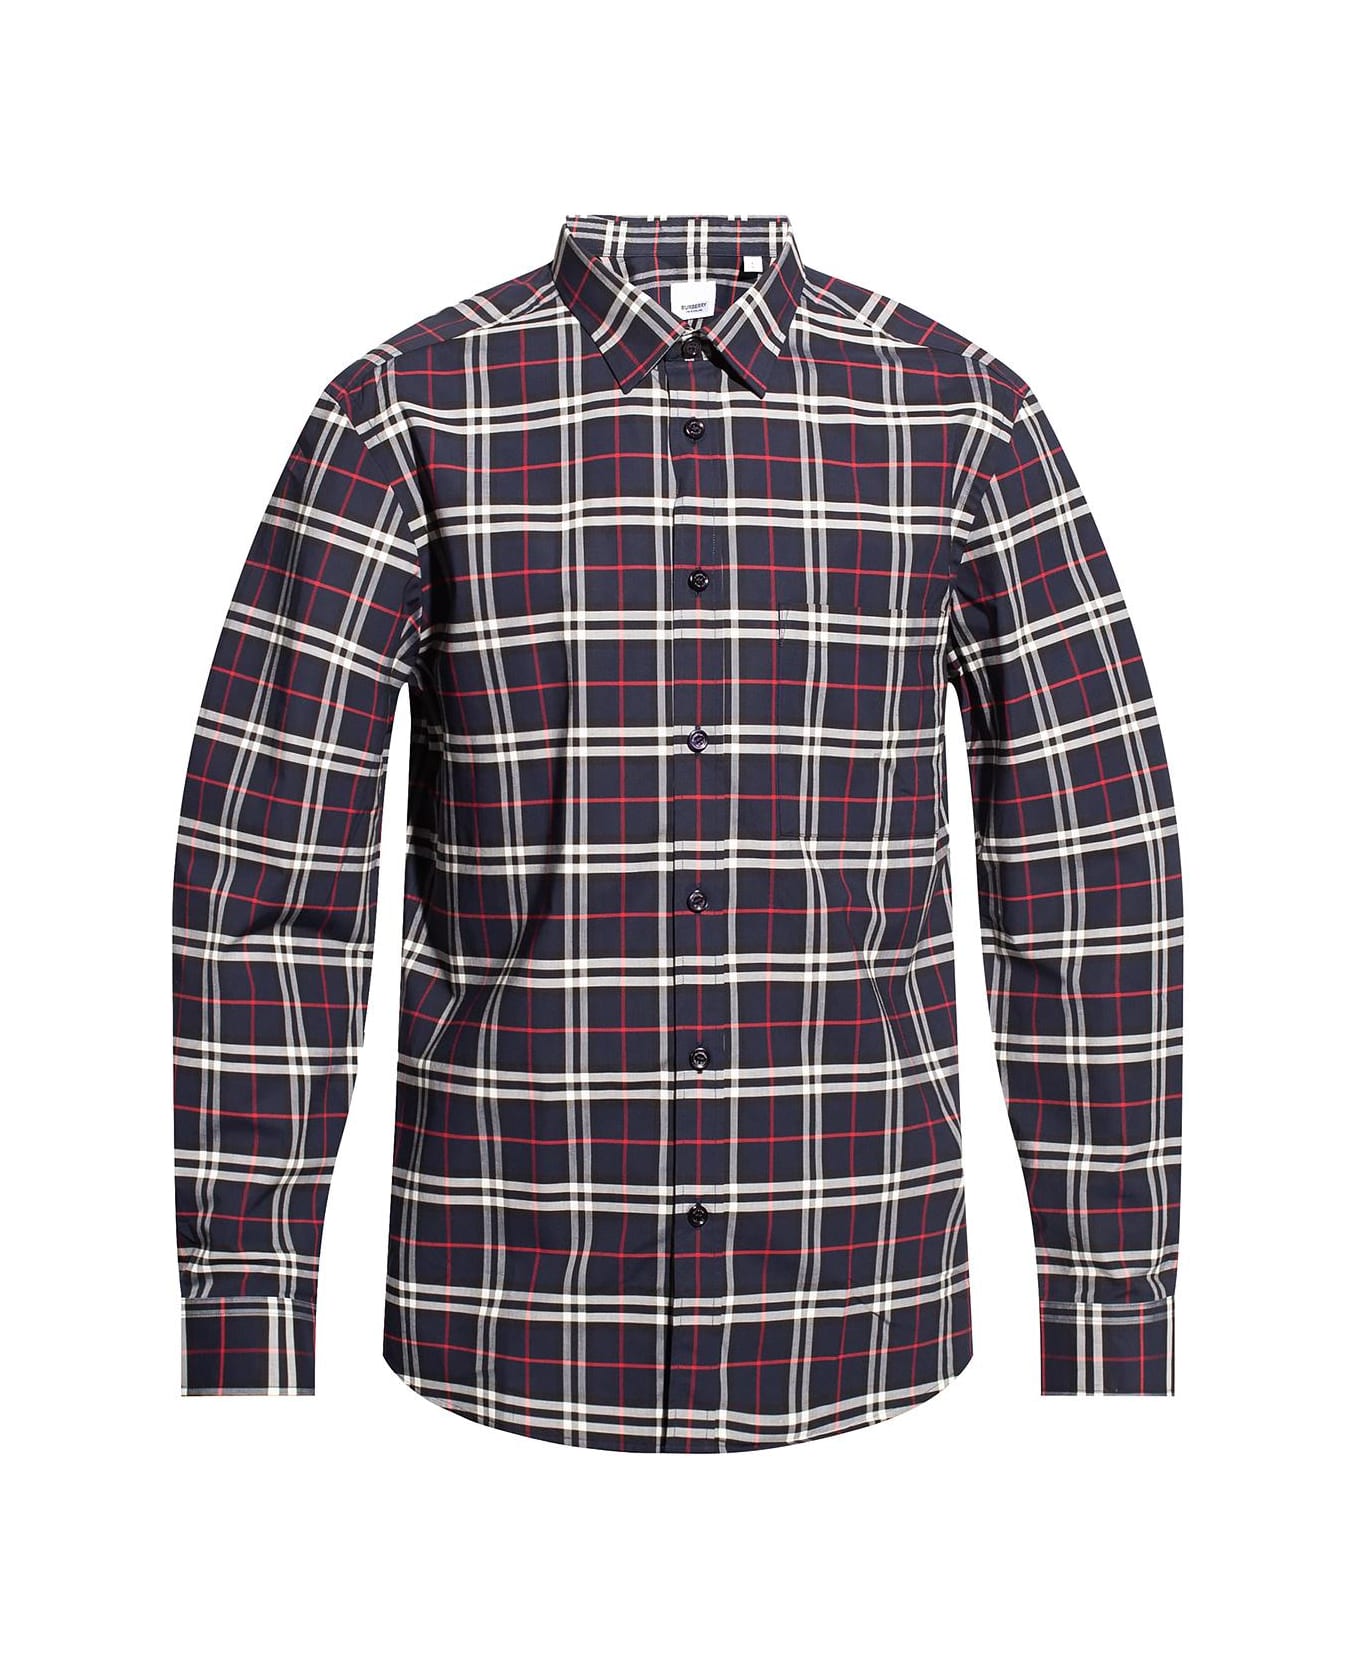 Burberry Shirt With Chest Pocket - NAVY